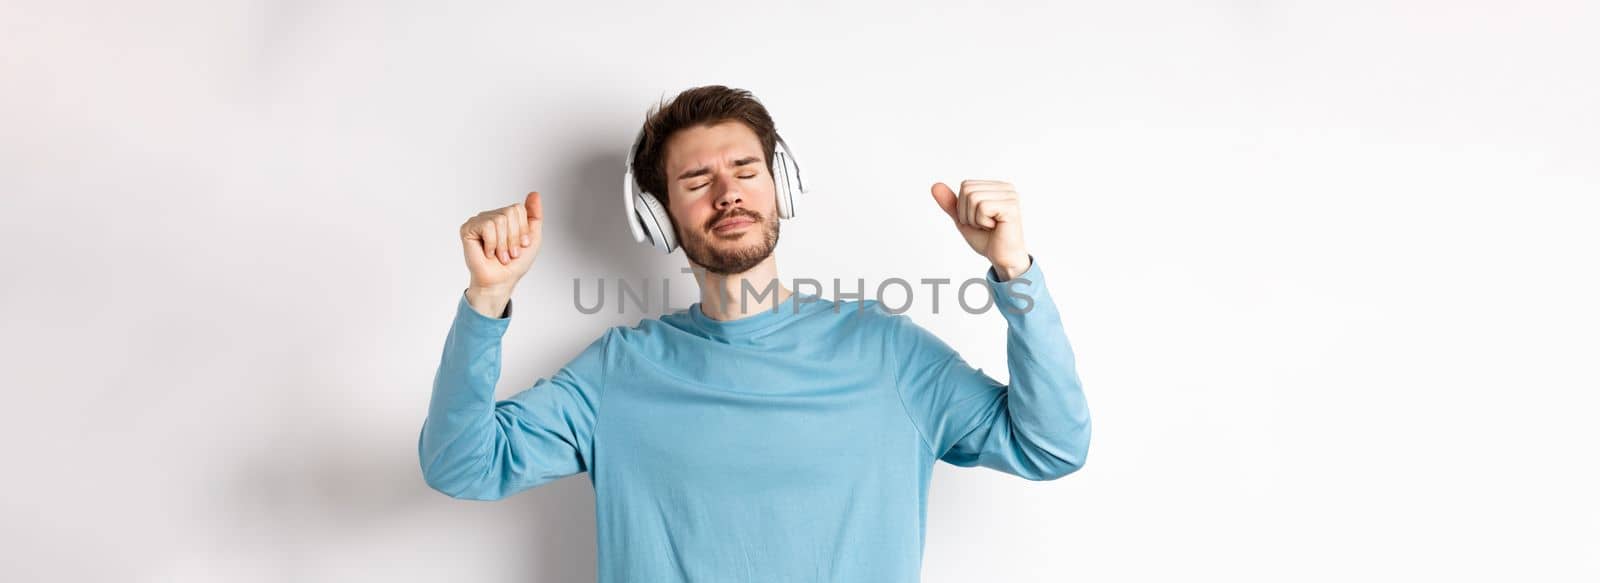 Happy handsome man dancing to music in headphones, listening songs and smiling, standing over white background.